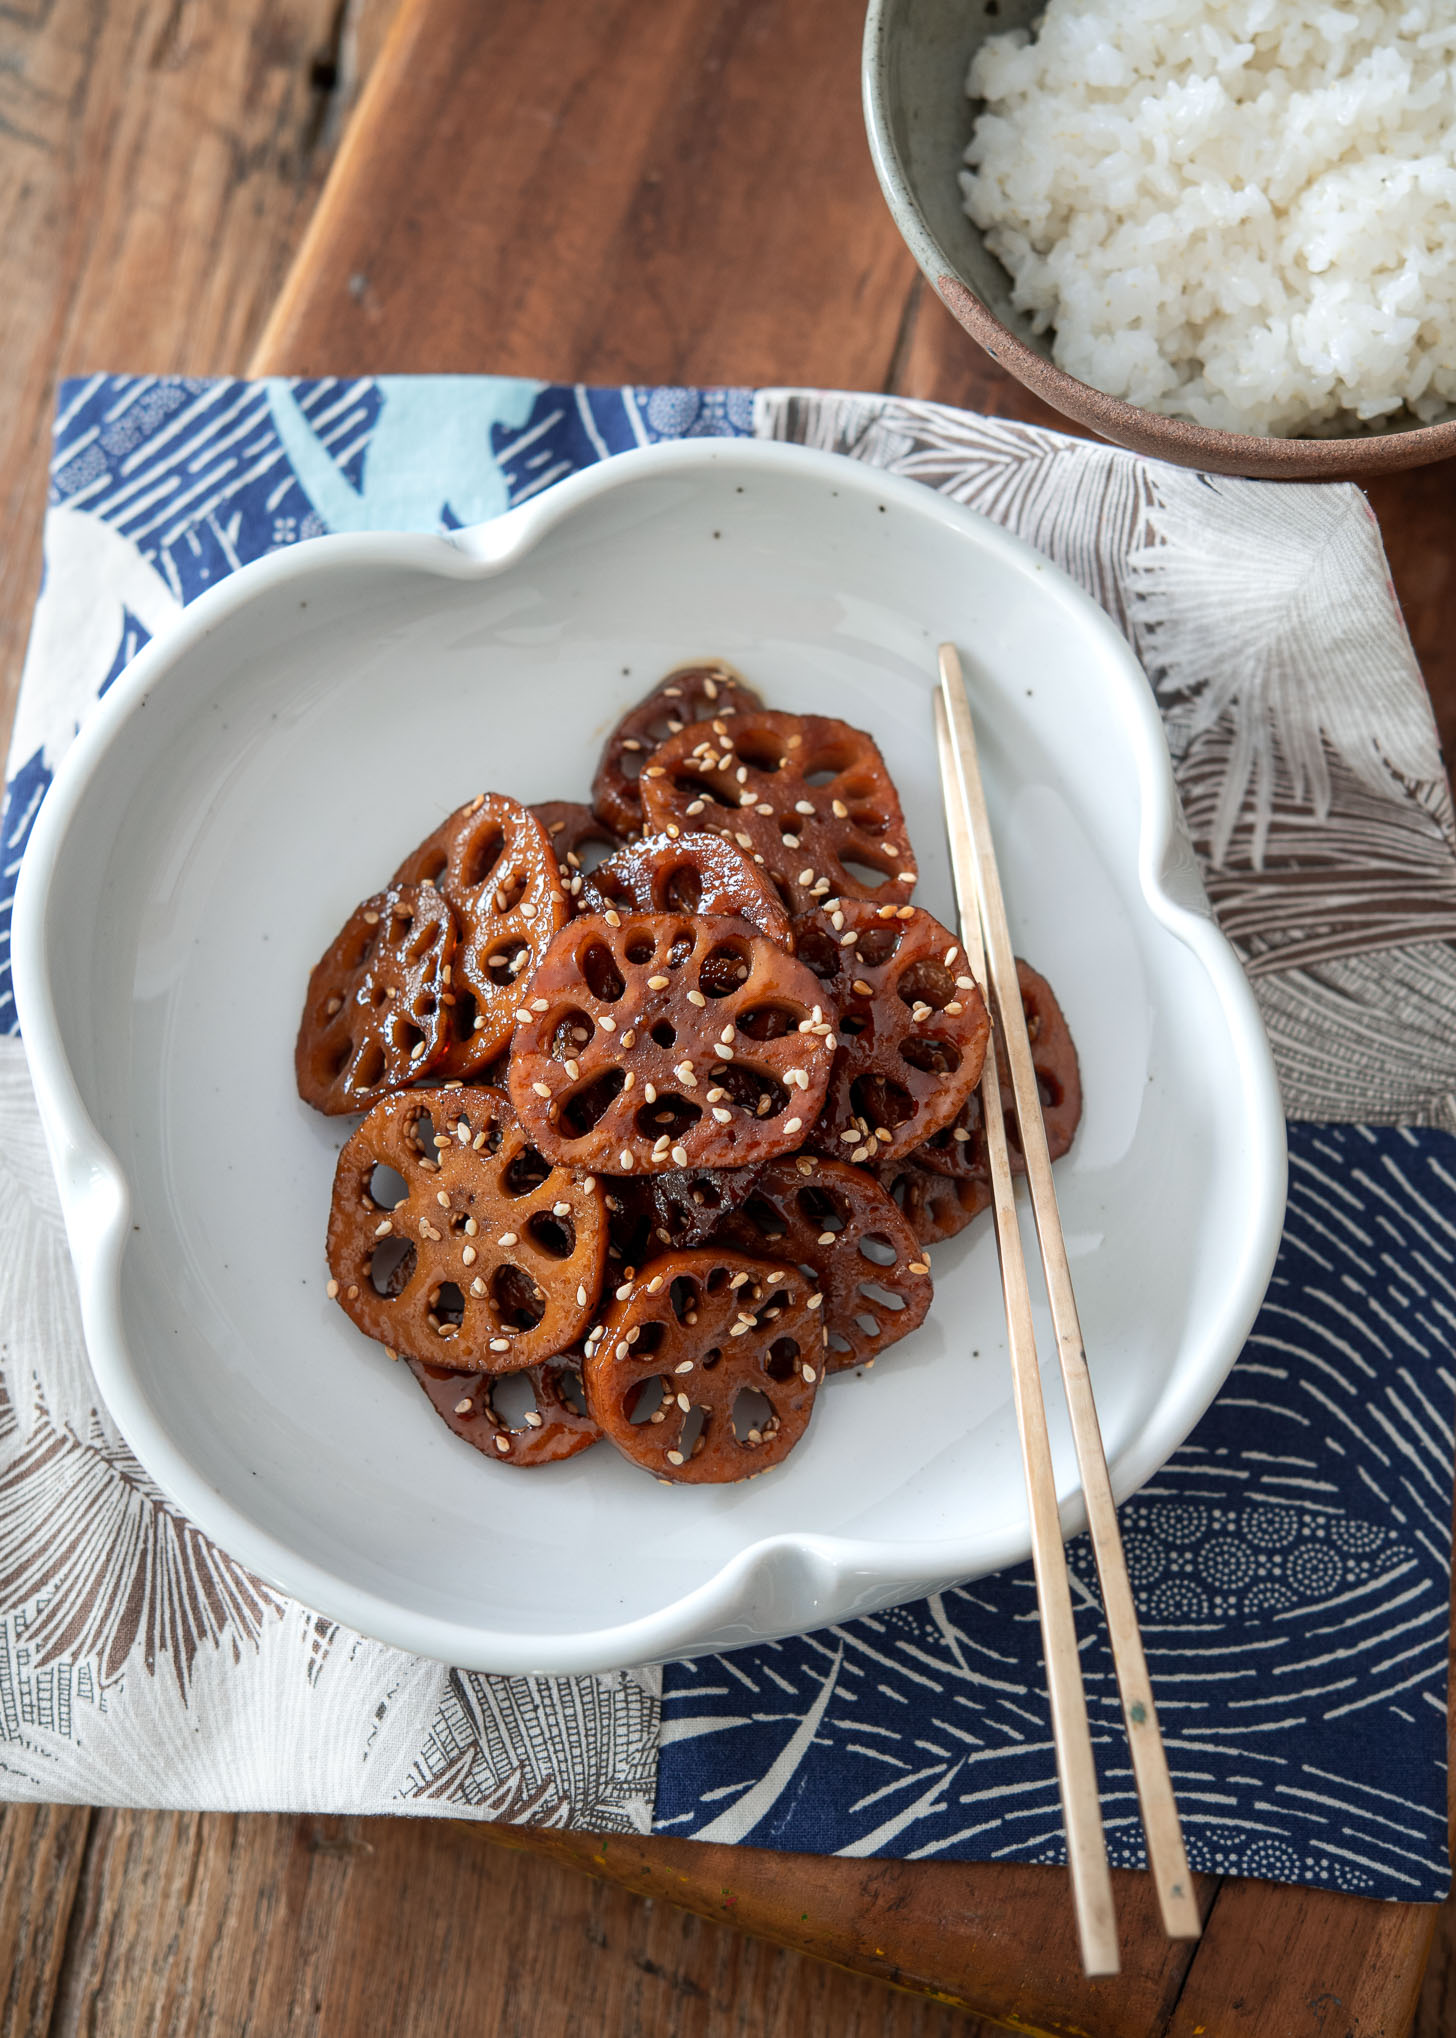 Korean braised lotus root is served in a white plate with chopsticks on the side.